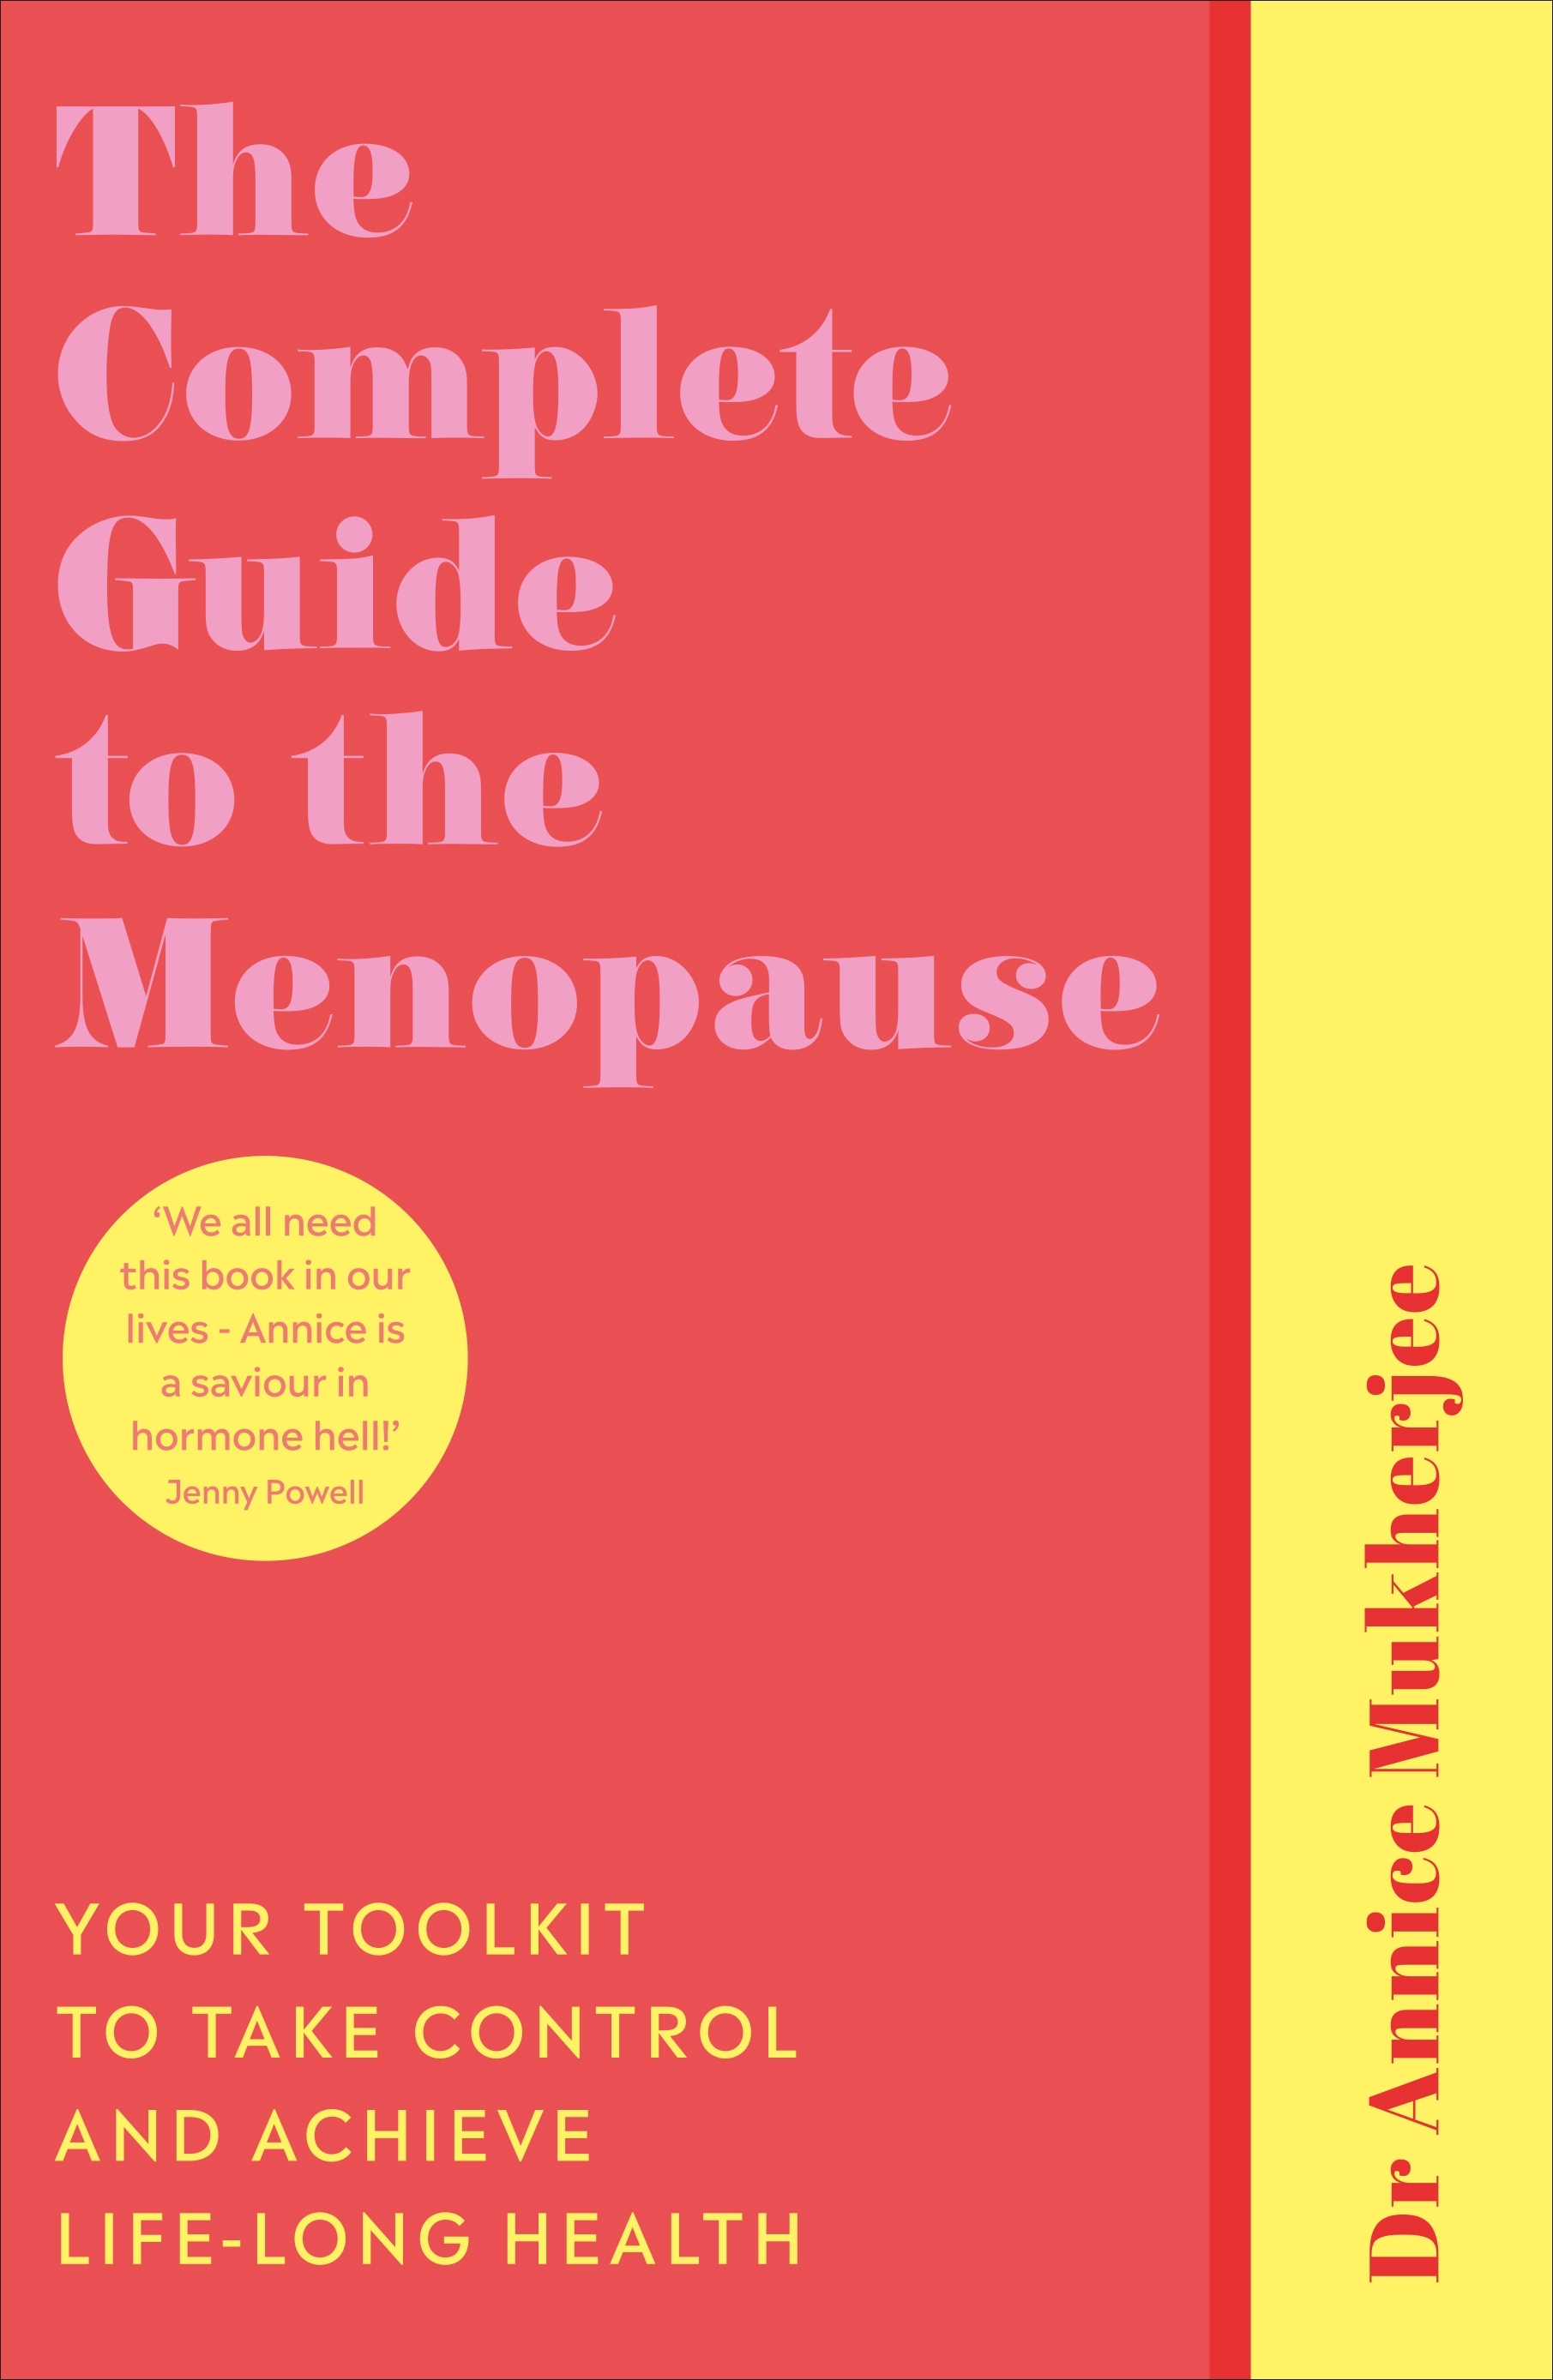 The Complete Guide to the Menopause by Annice Mukherjee Penguin Books